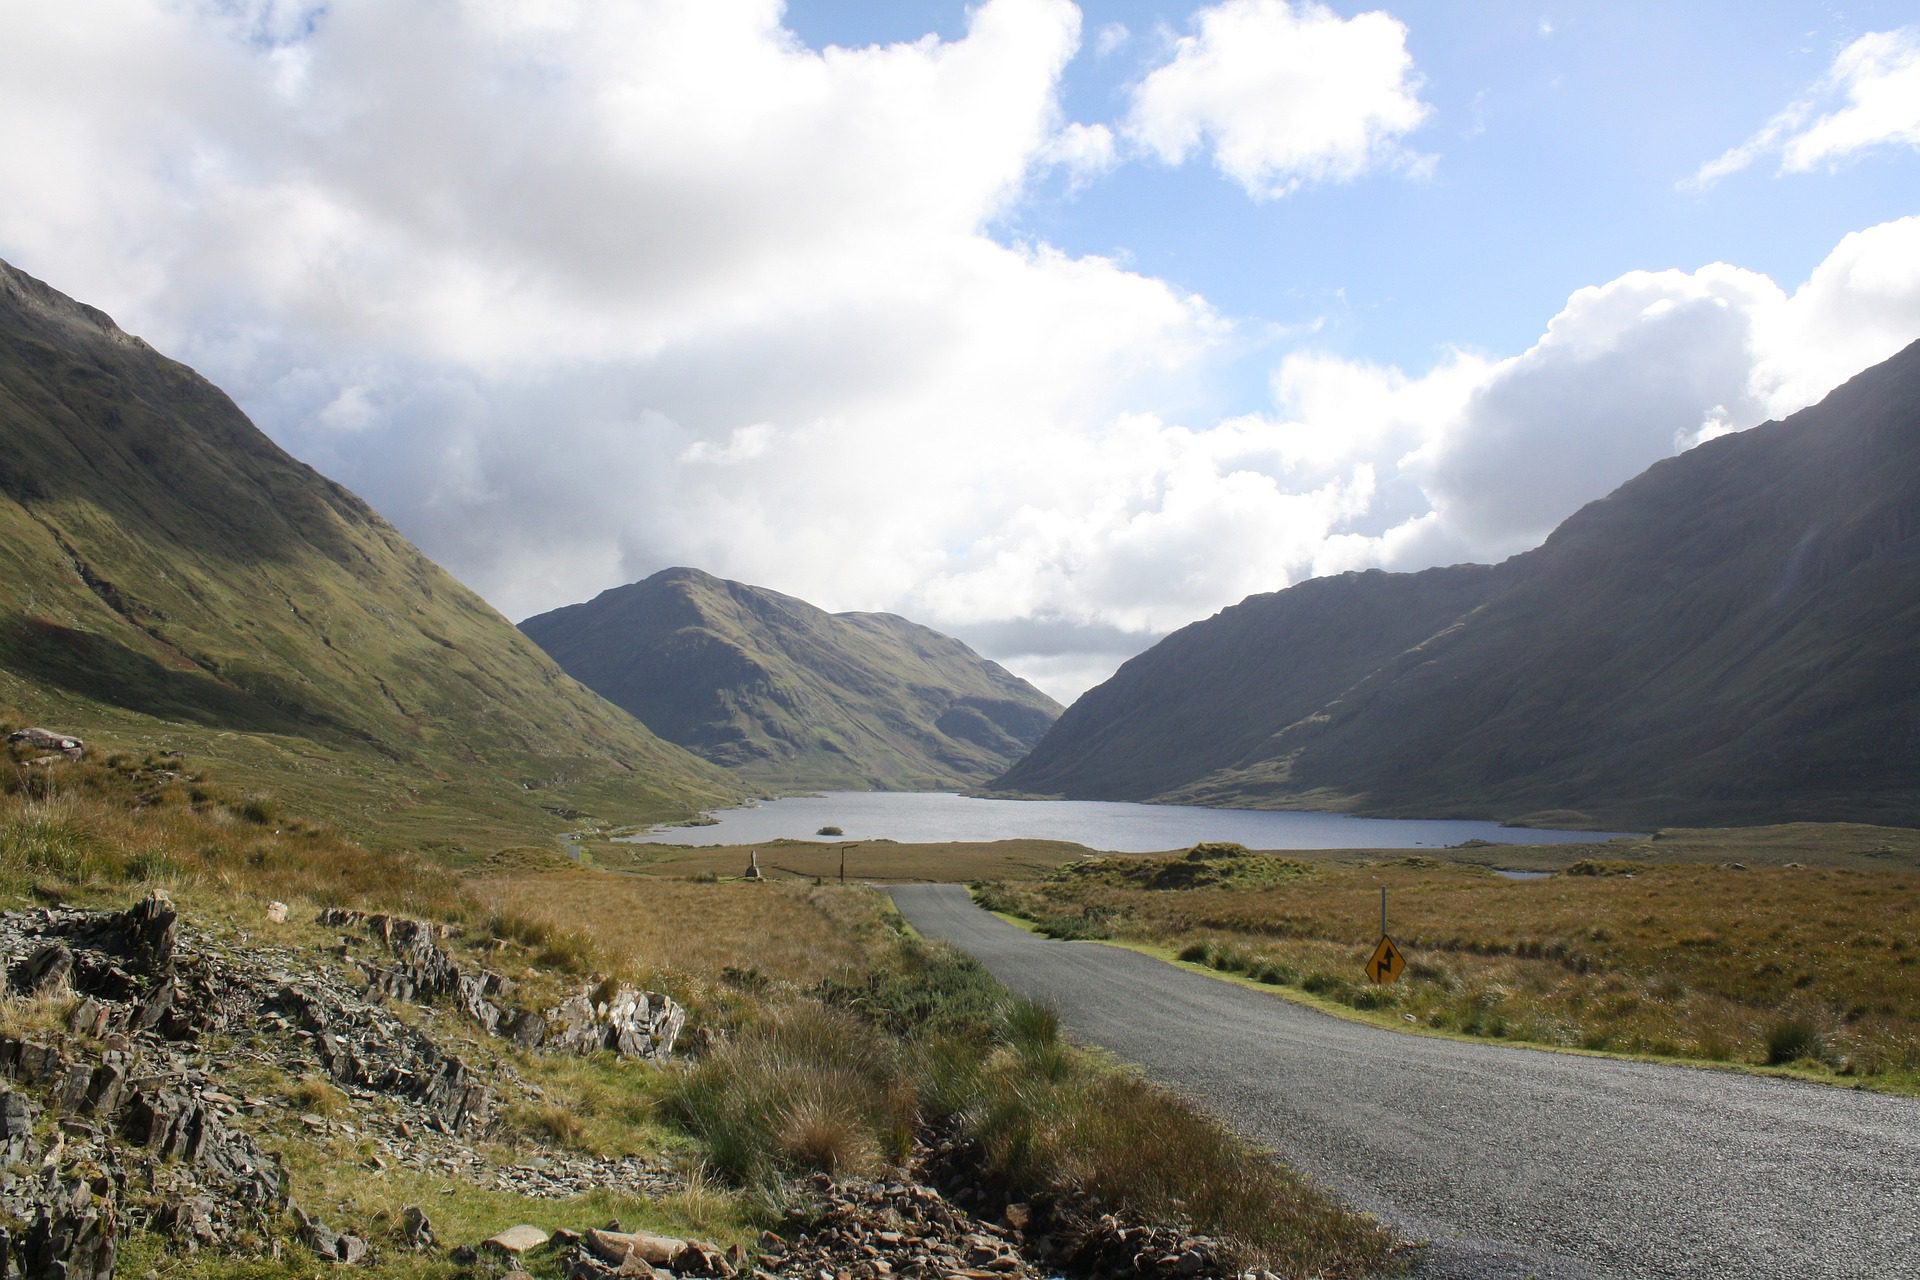 A scenic road winds through a valley with a lake nestled between rolling hills under a partly cloudy sky in Ireland.